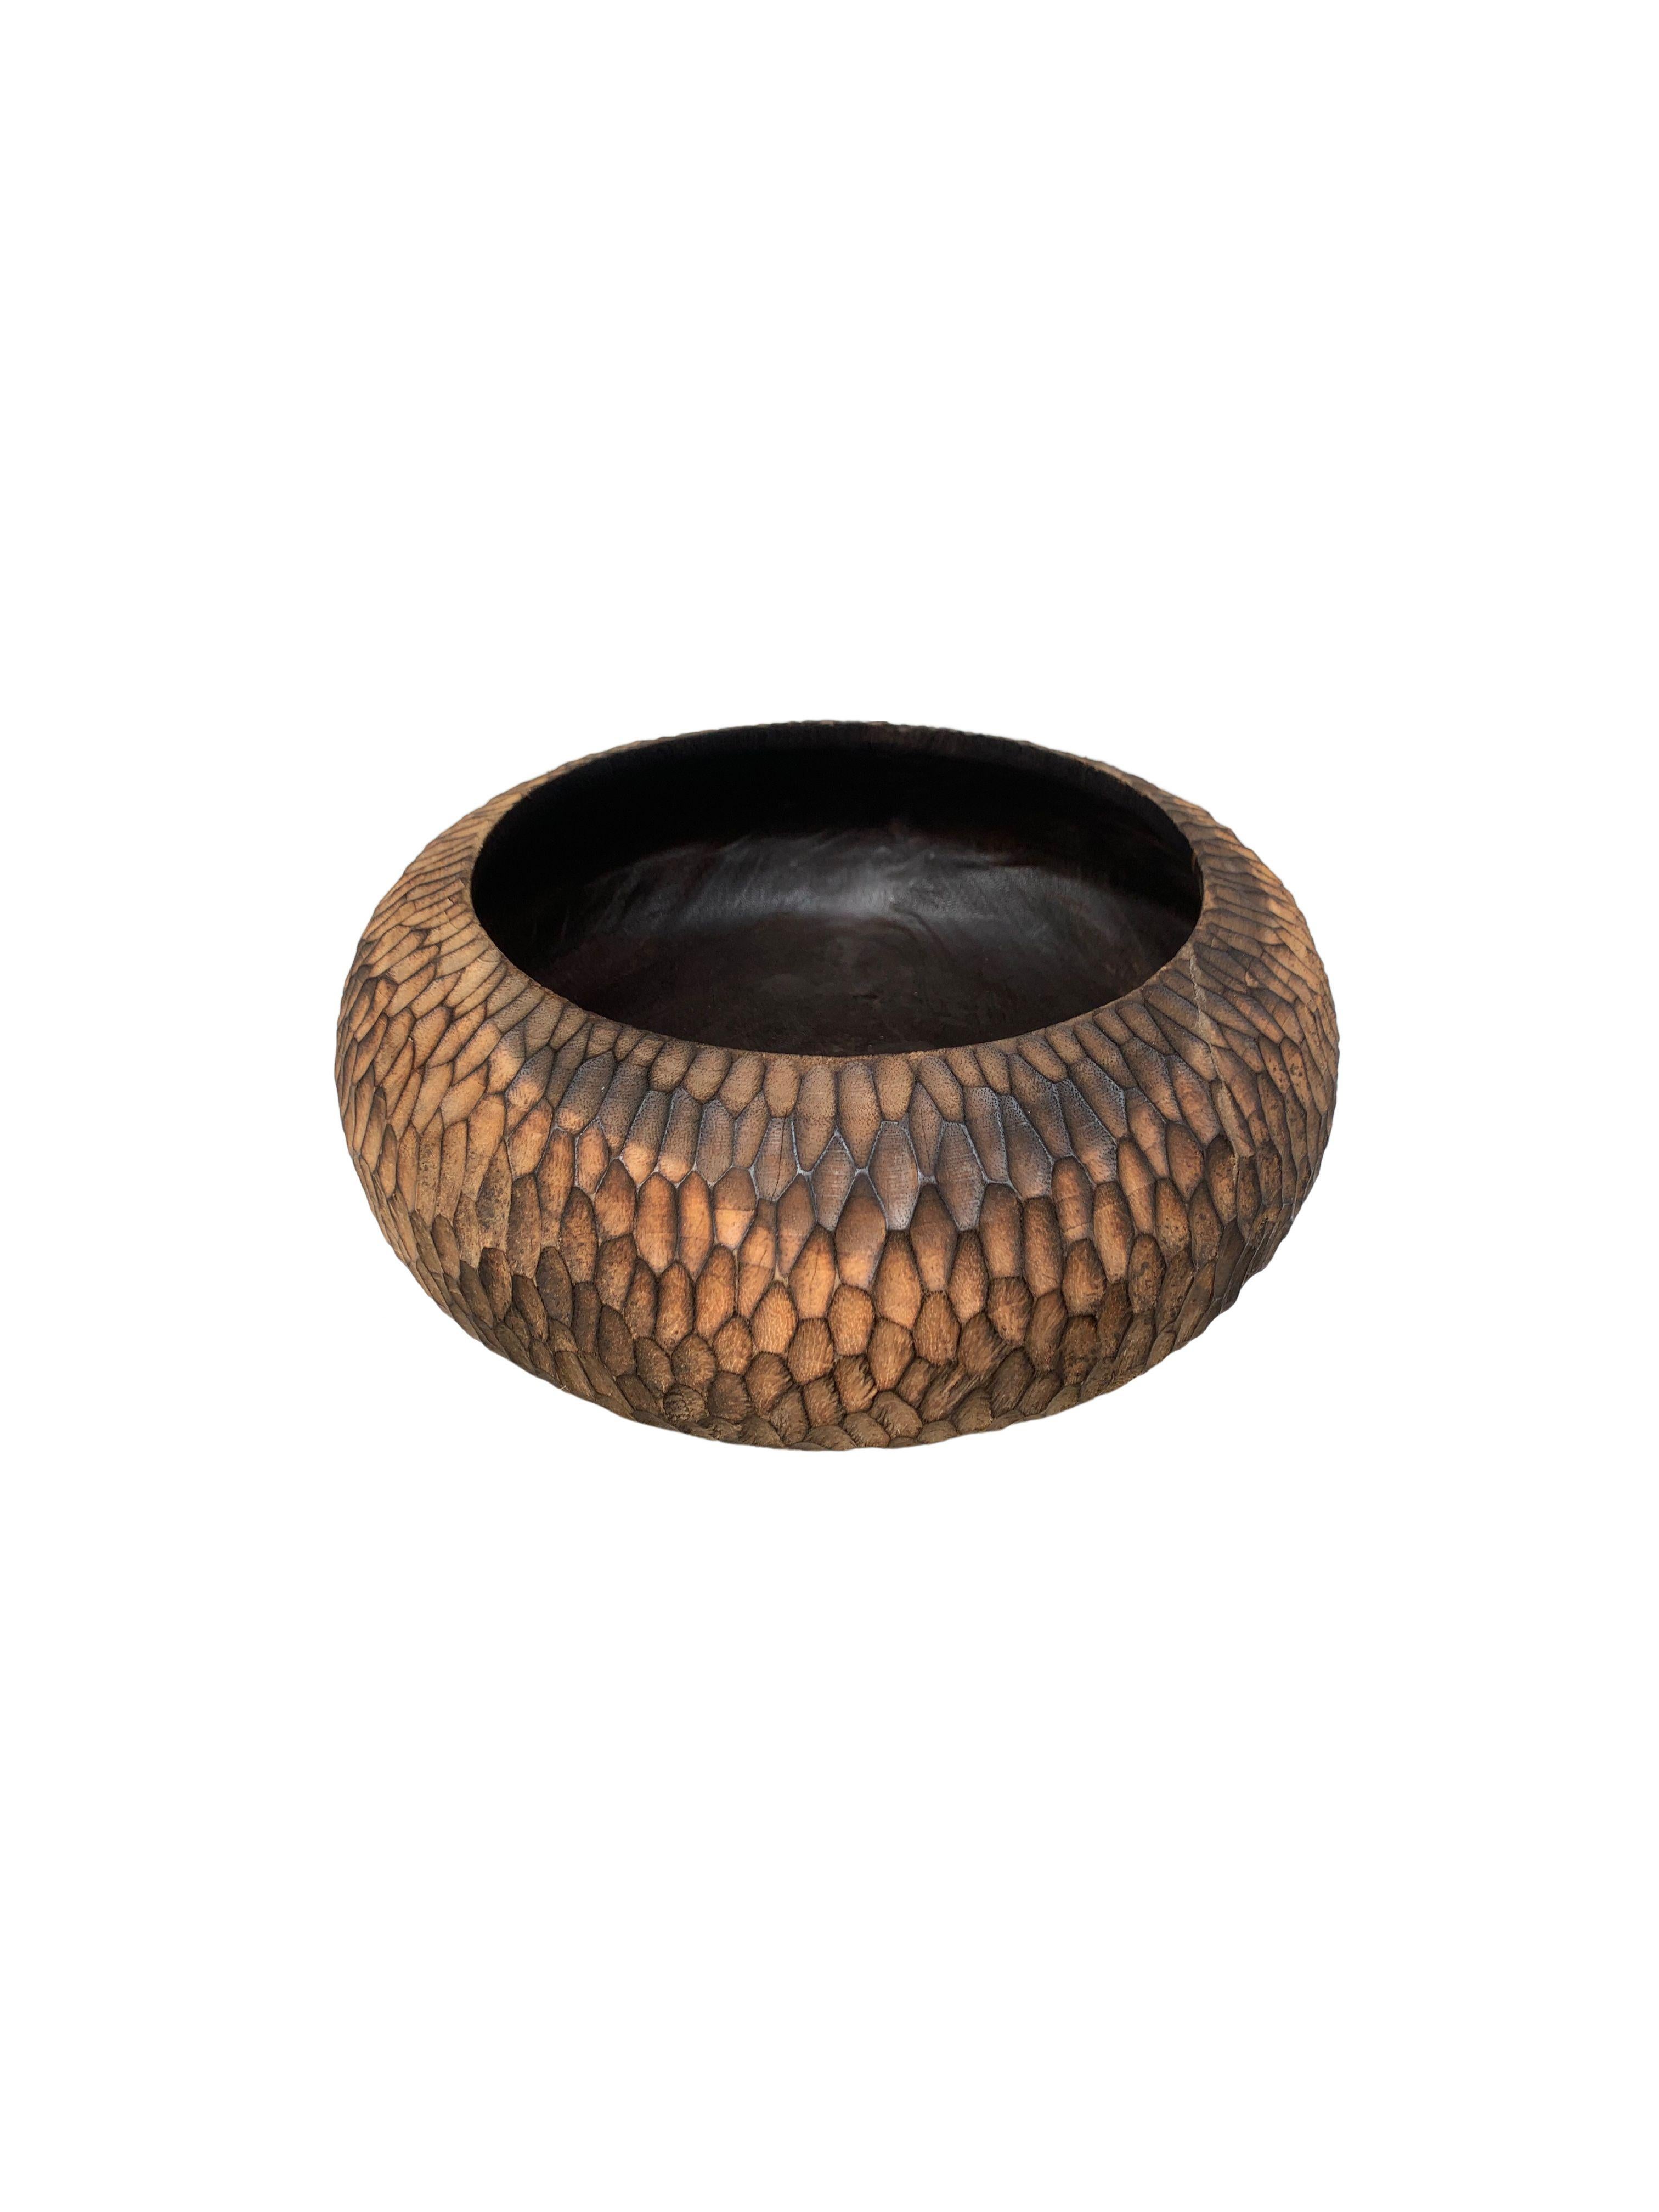 Organic Modern Solid Mango Wood Bowl with Hand-Hewn Detailing and Burnt Detailing For Sale